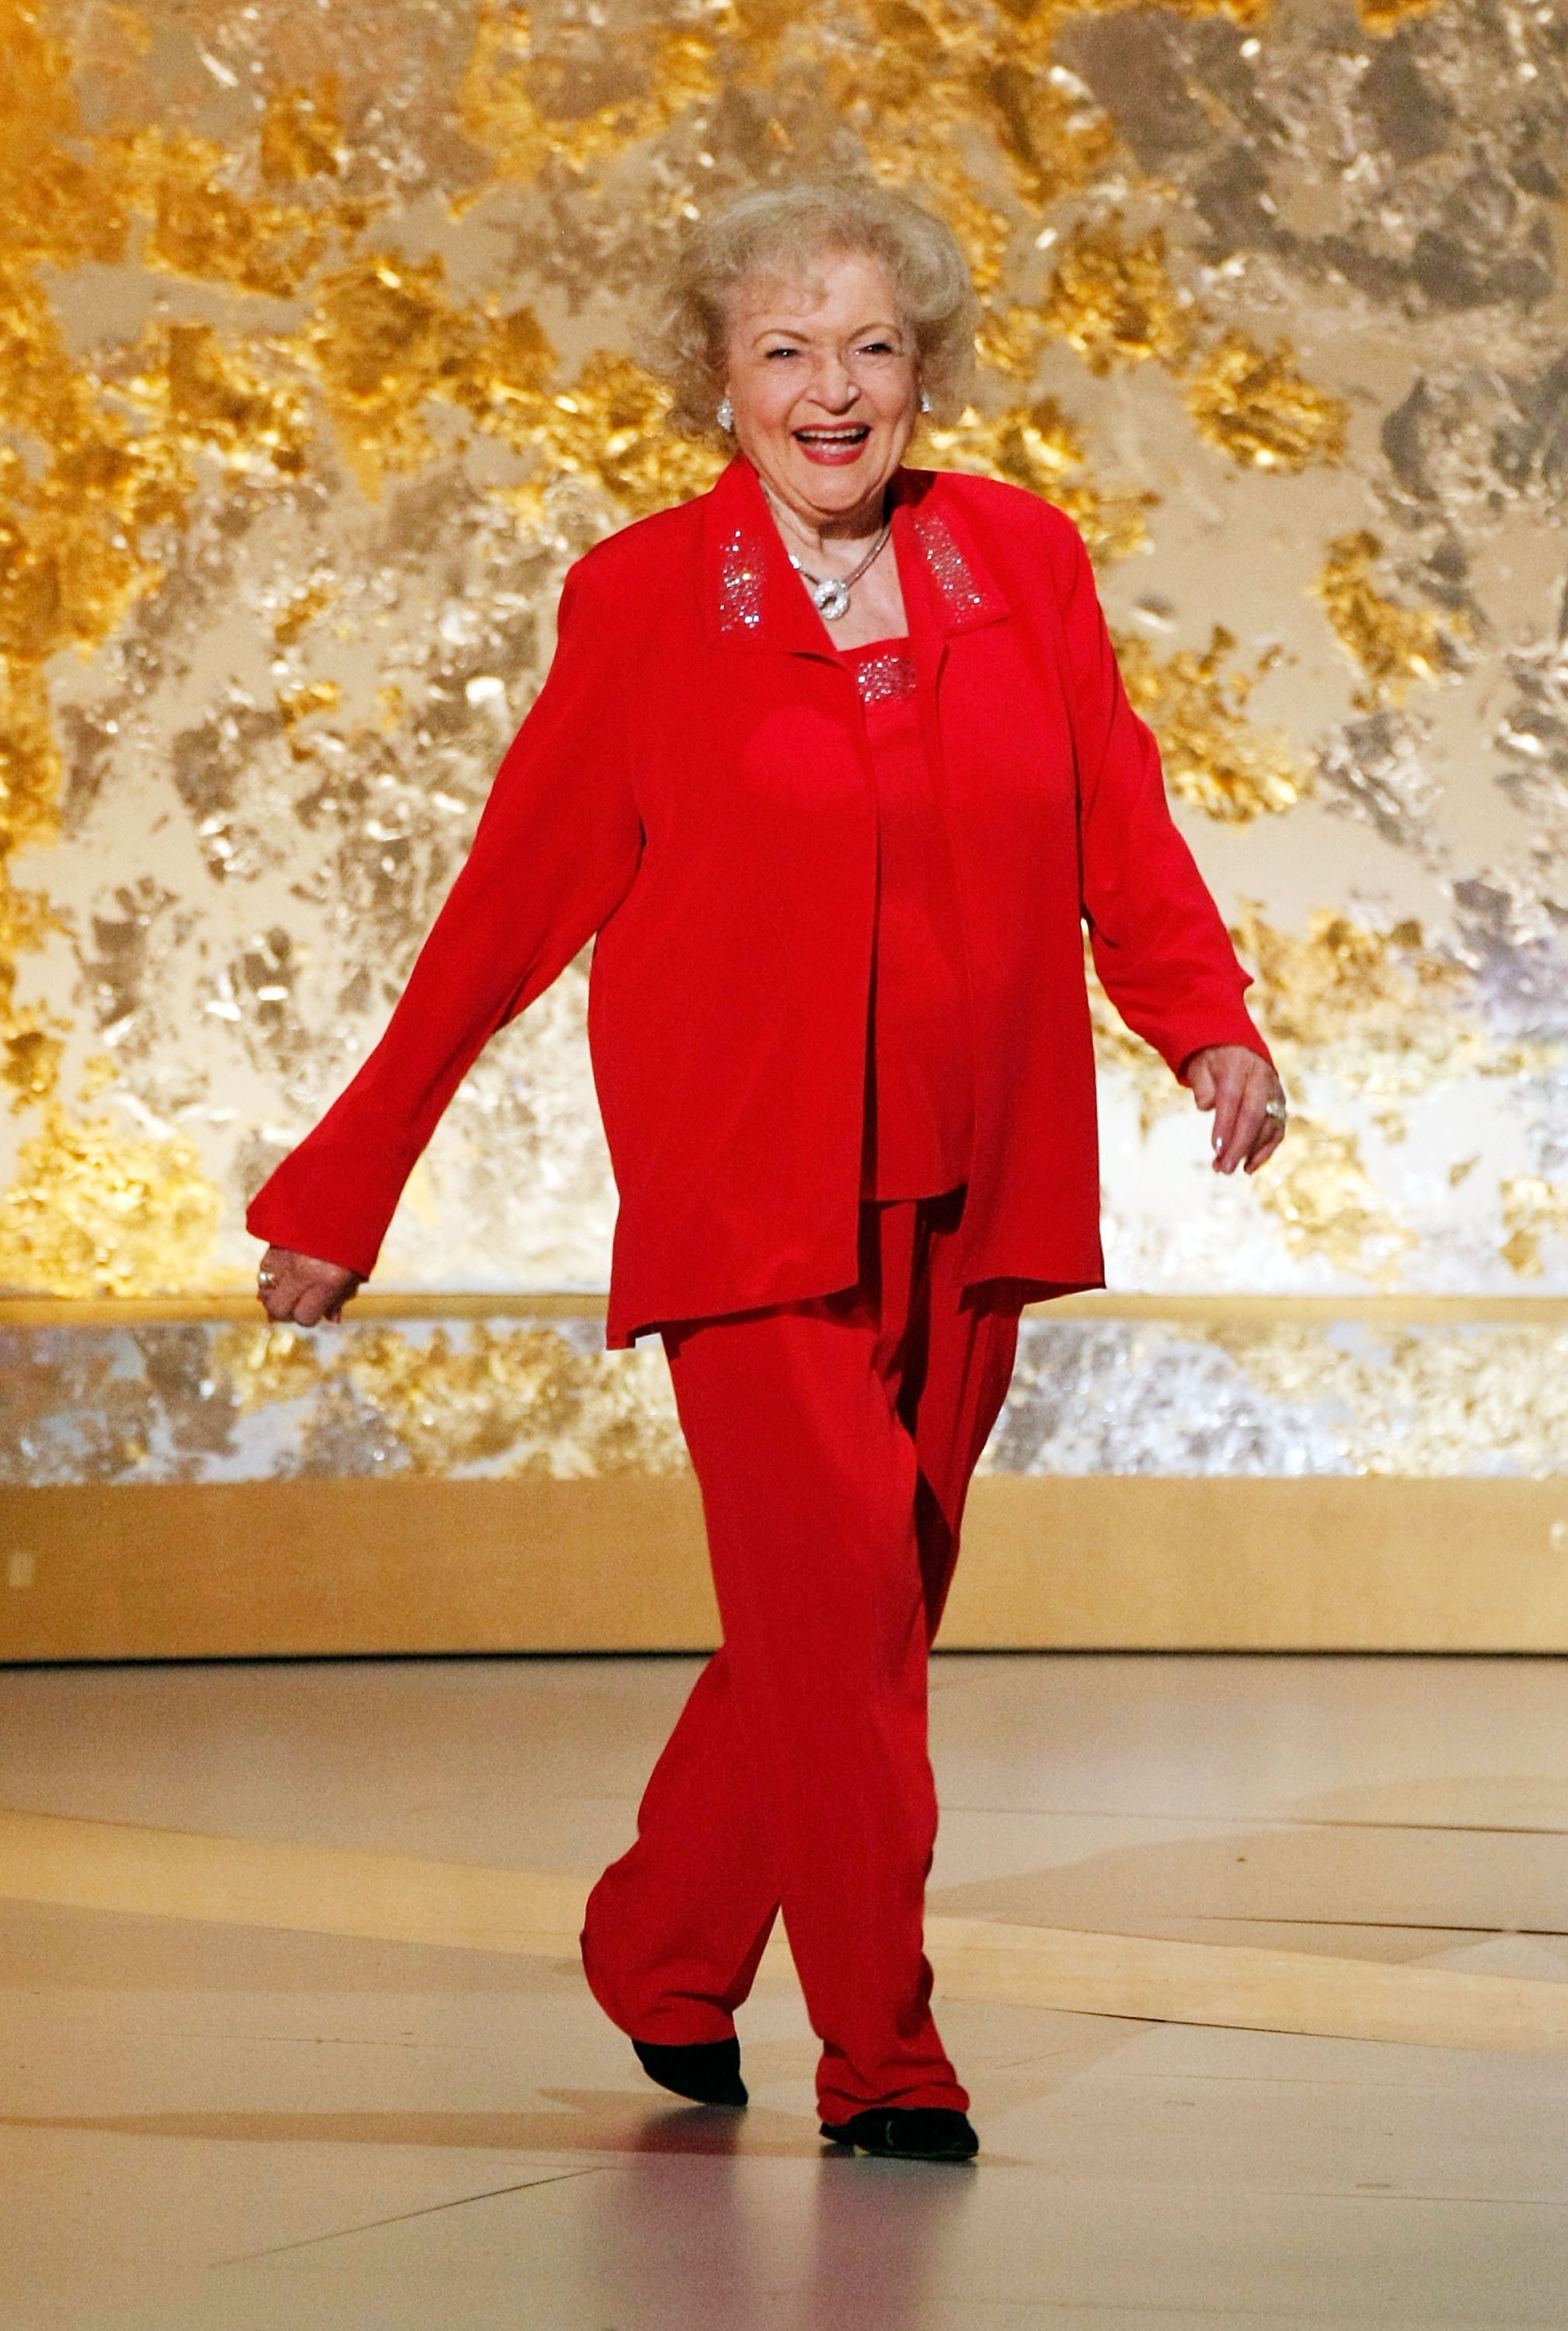 Betty White onstage during the 60th Primetime Emmy Awards on September 21, 2008, in California. | Source: Getty Images